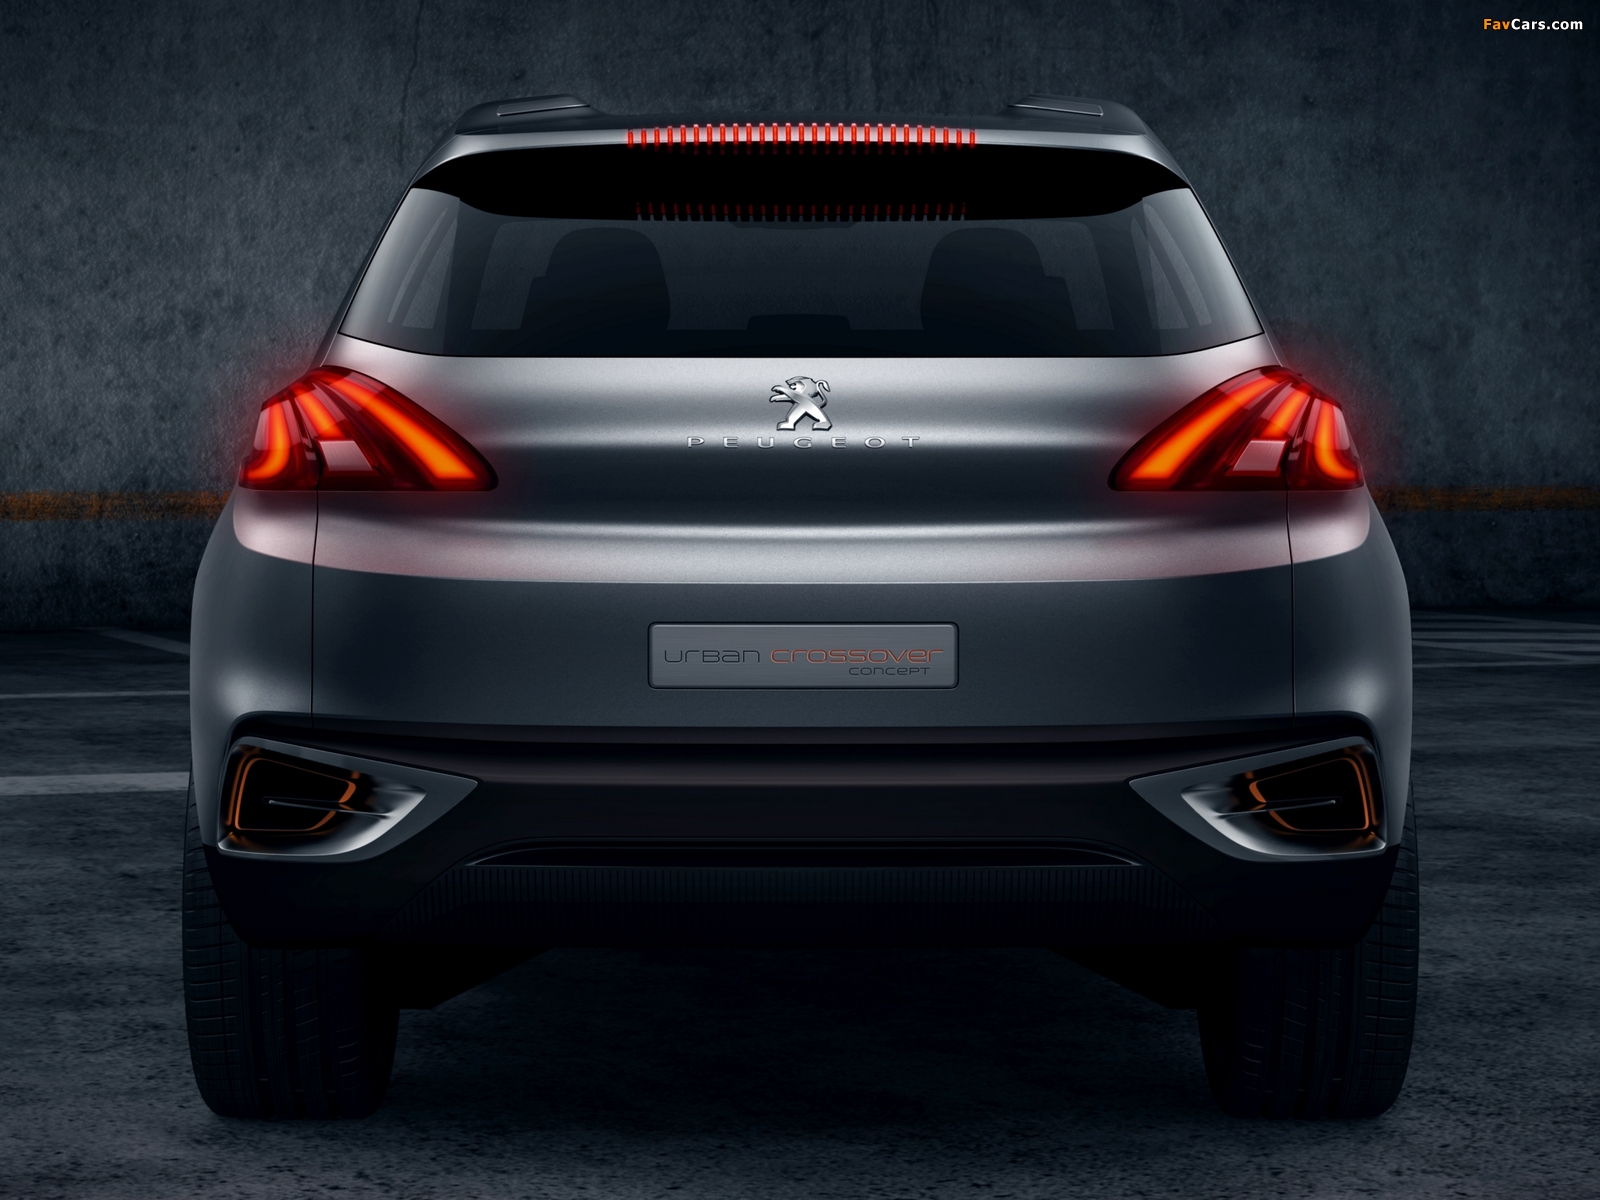 Peugeot Urban Crossover Concept 2012 pictures (1600 x 1200)